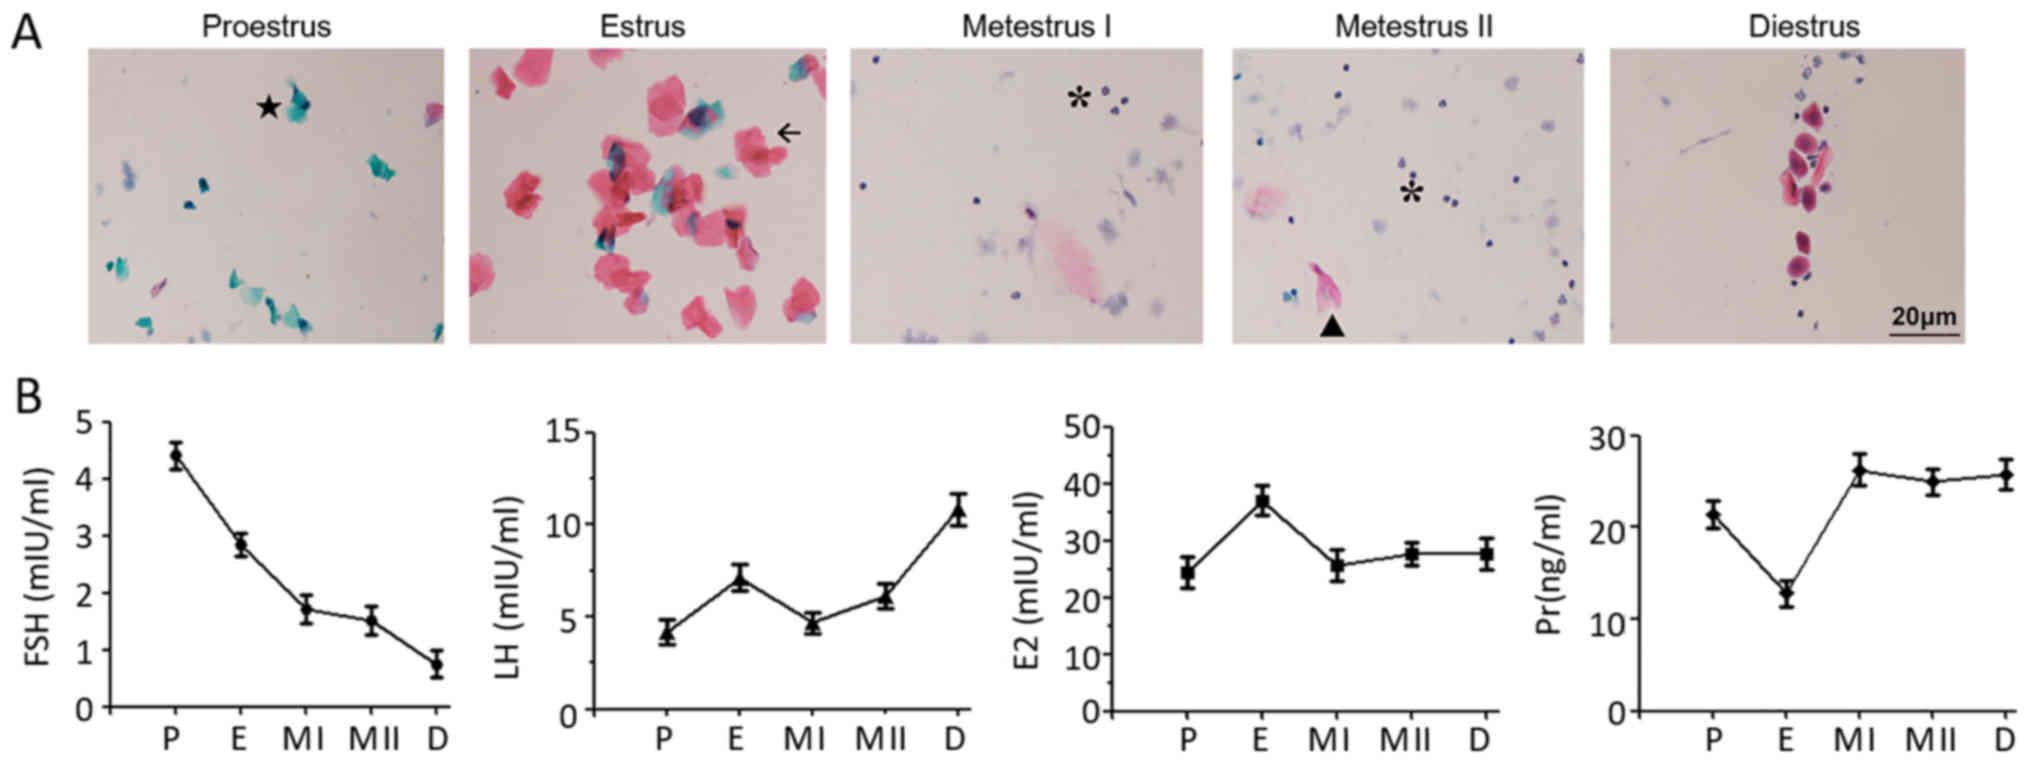 Expression of SUMO associated proteins in the mouse endometrium is  regulated by ovarian hormones throughout the estrous cycle